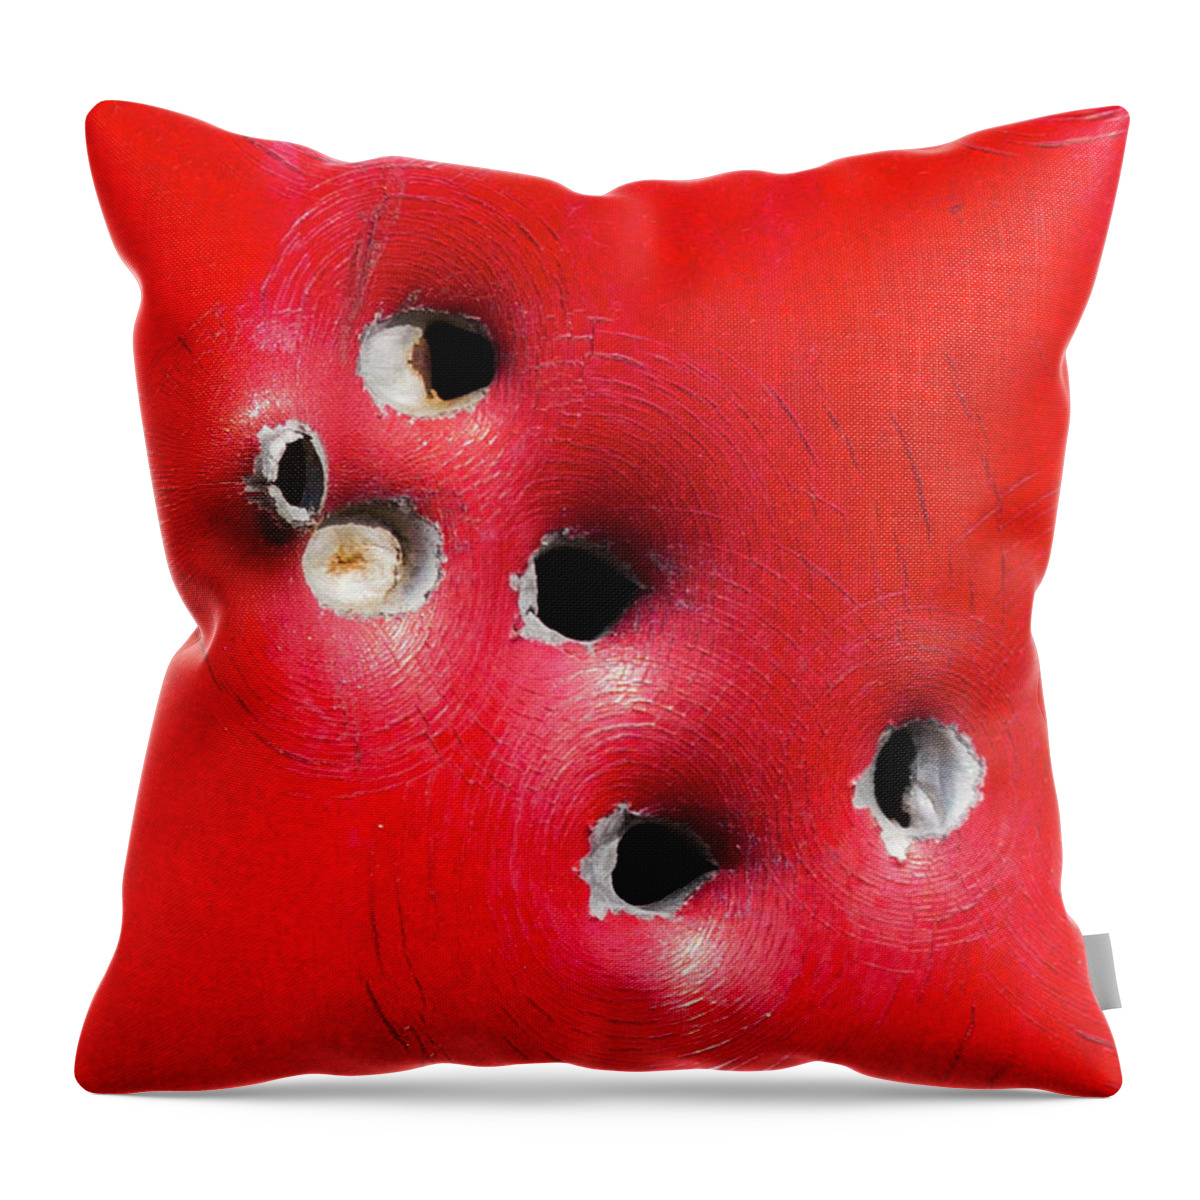 Bill Kesler Photography Throw Pillow featuring the photograph One Through The Back by Bill Kesler